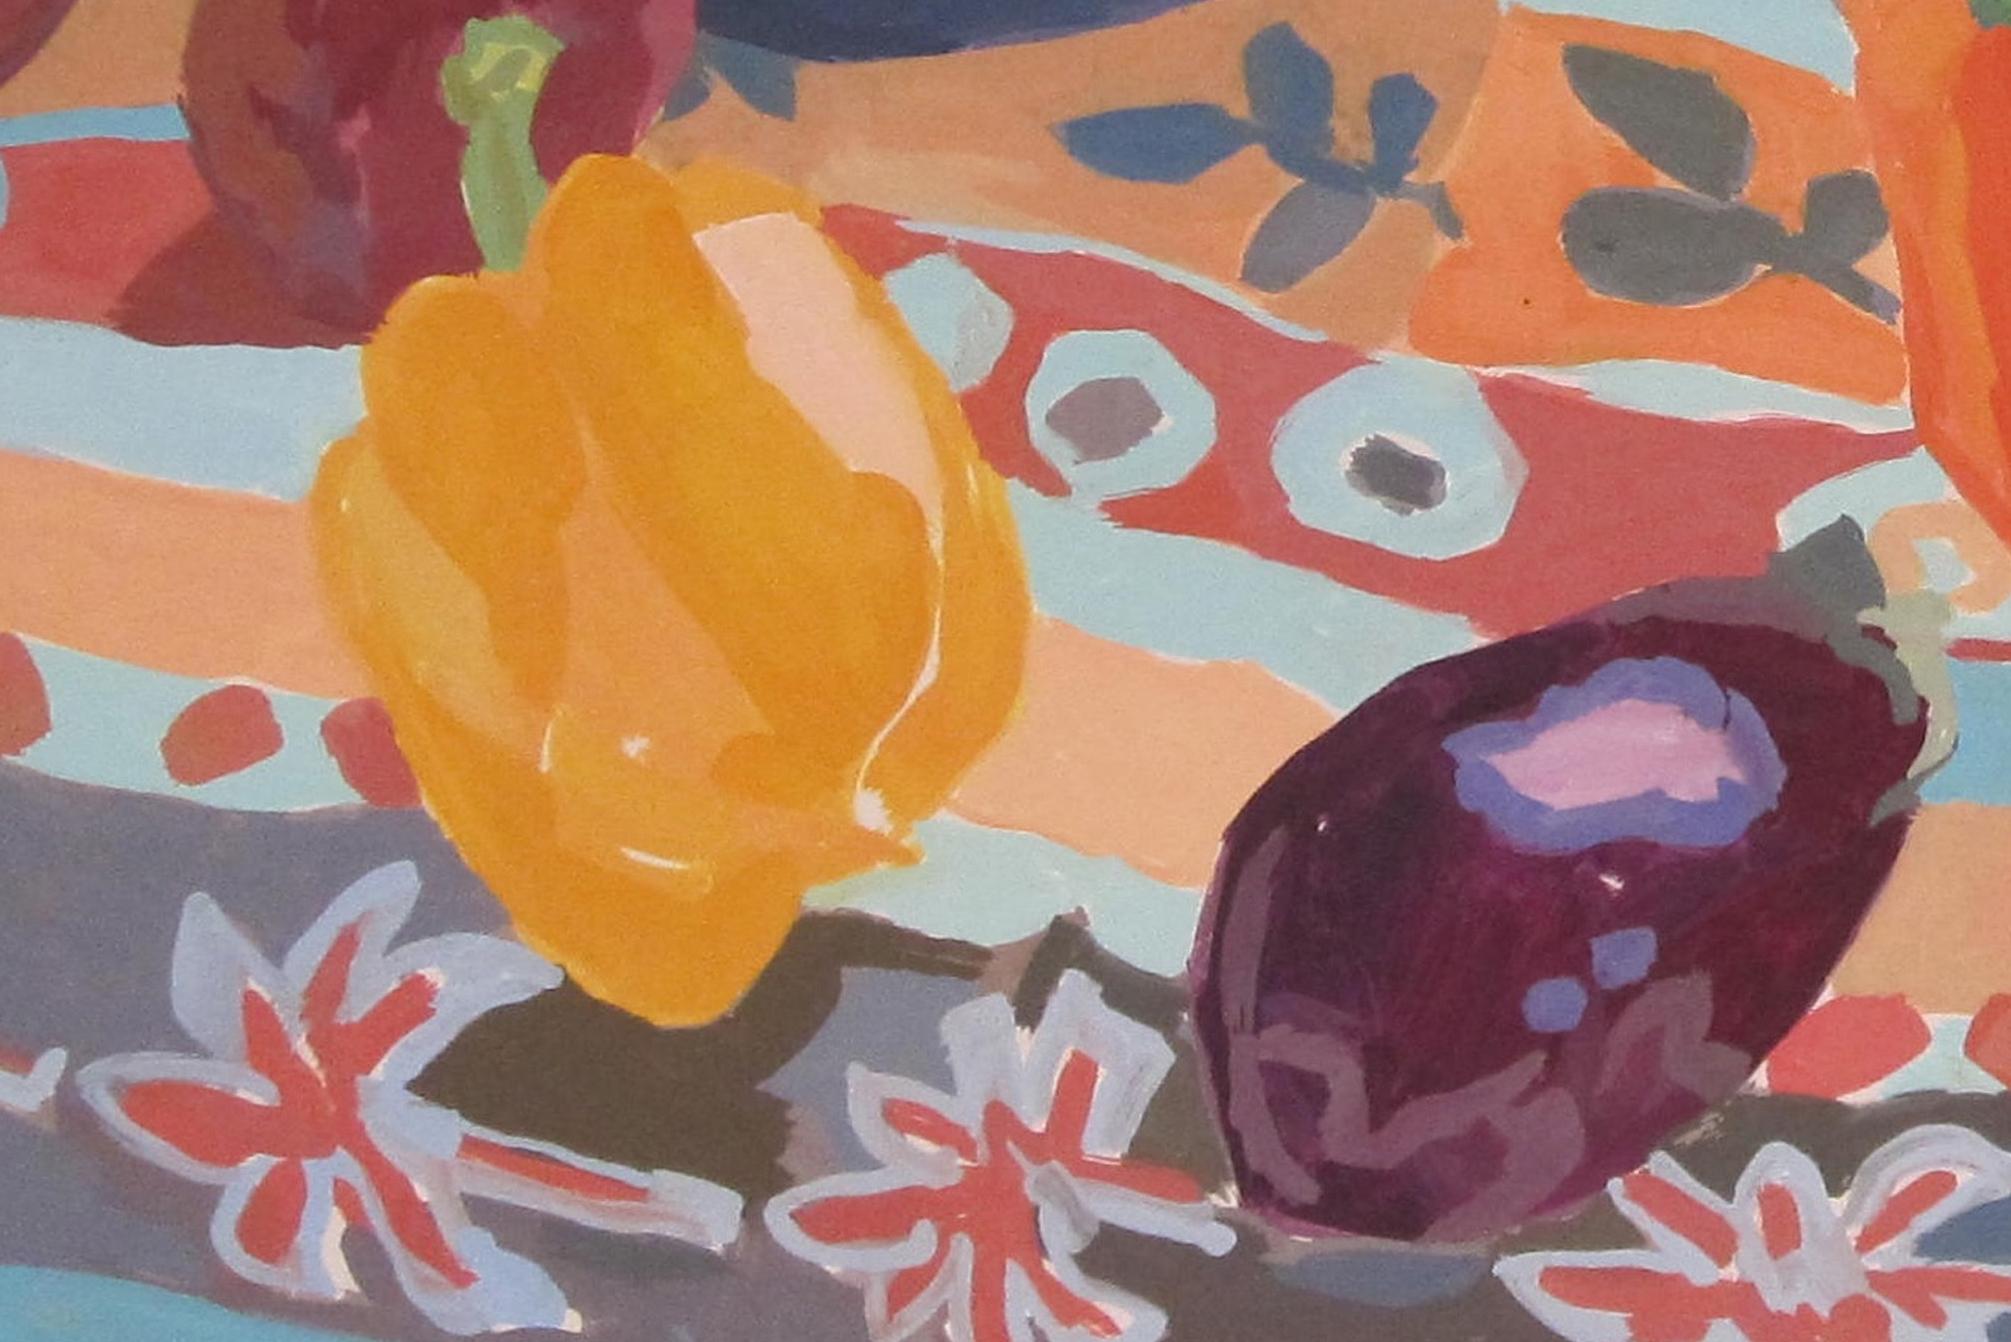 Still Life with Bowls and Peppers - Brown Still-Life Painting by Rosie Montford